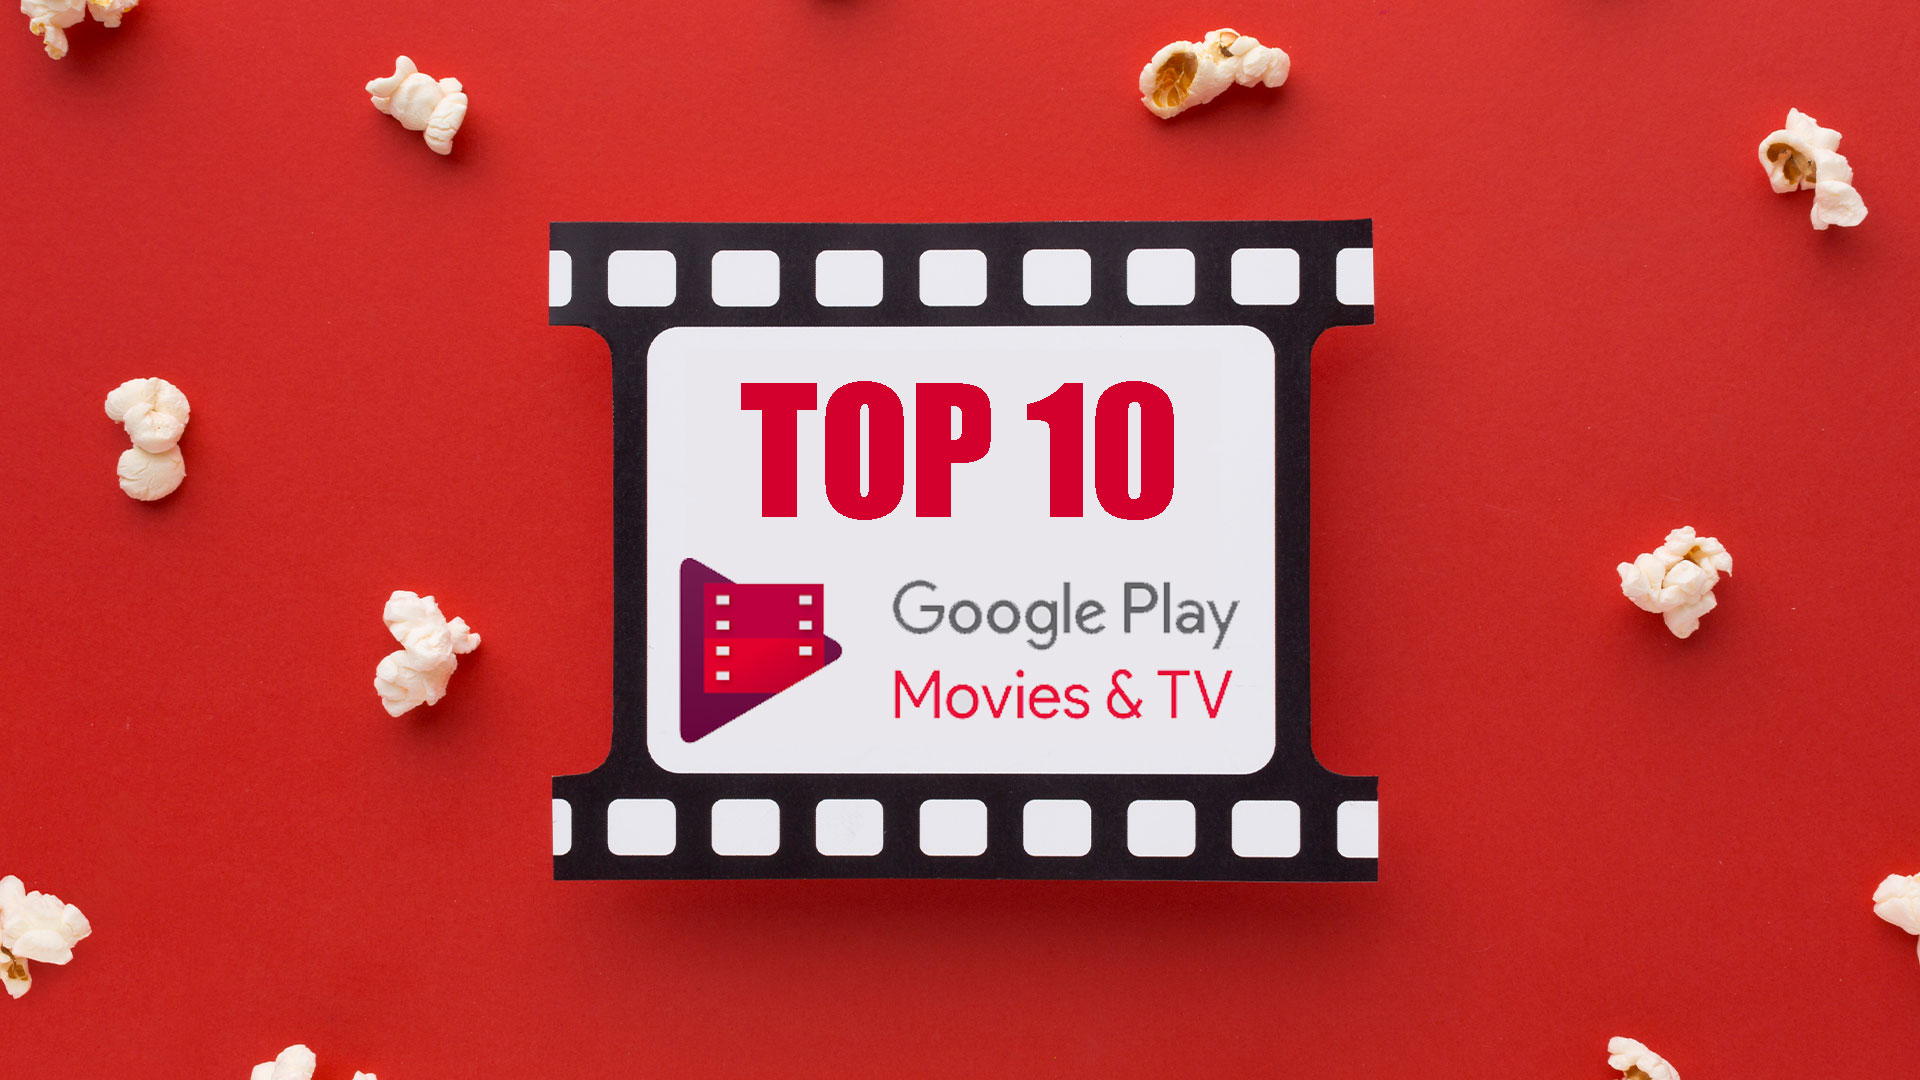 Google ranking: these are the most watched films by the American public